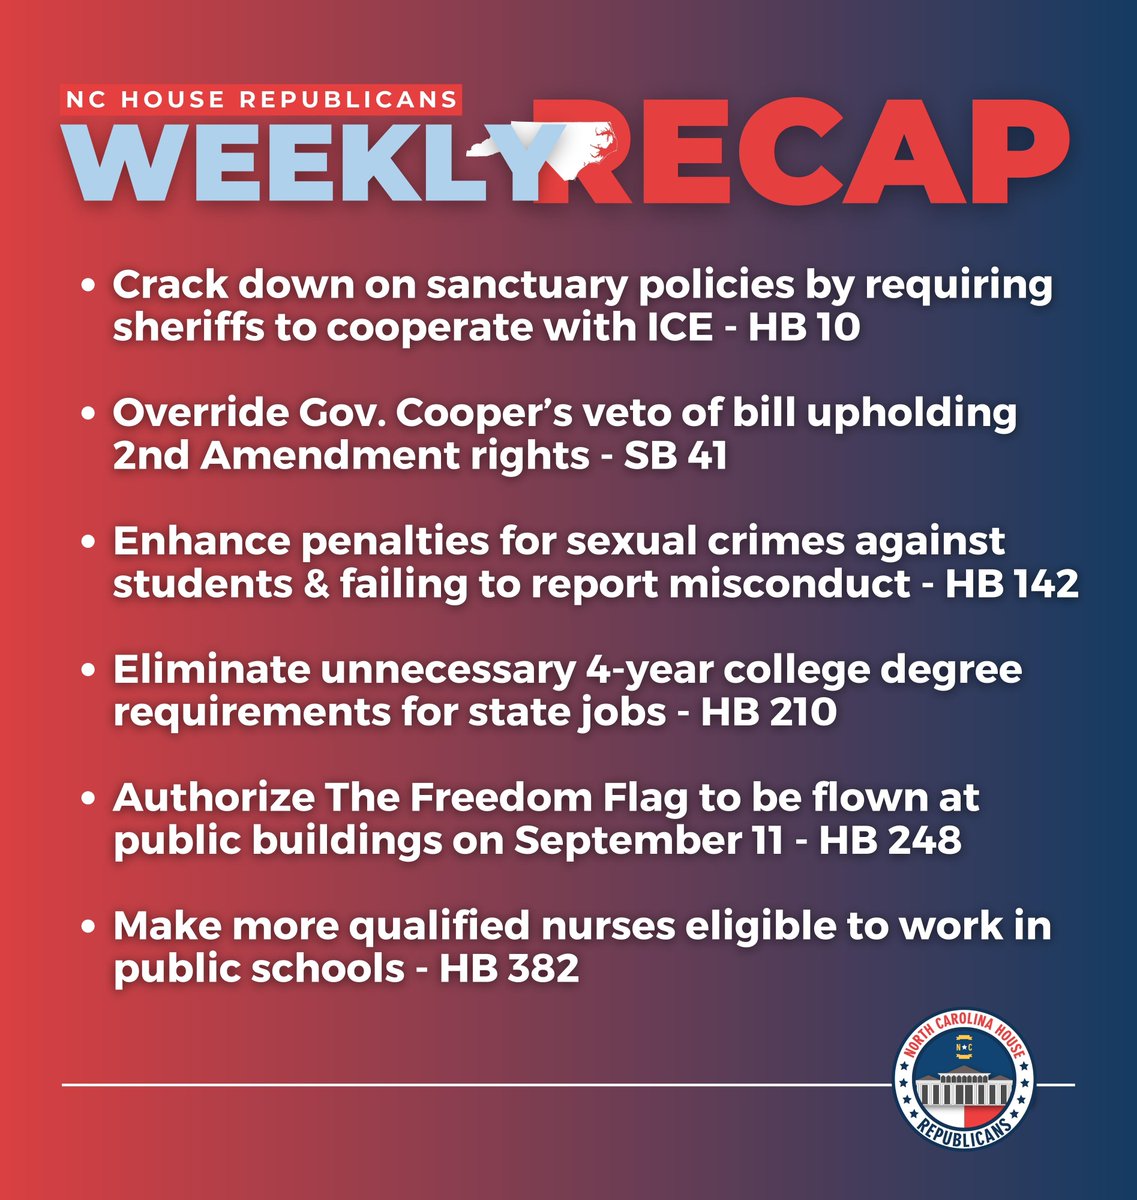 We had another productive week in the House, advancing common-sense legislation that makes our state a better place to live, work and raise a family! #NCGA #NCHouse #RepCrutchfield